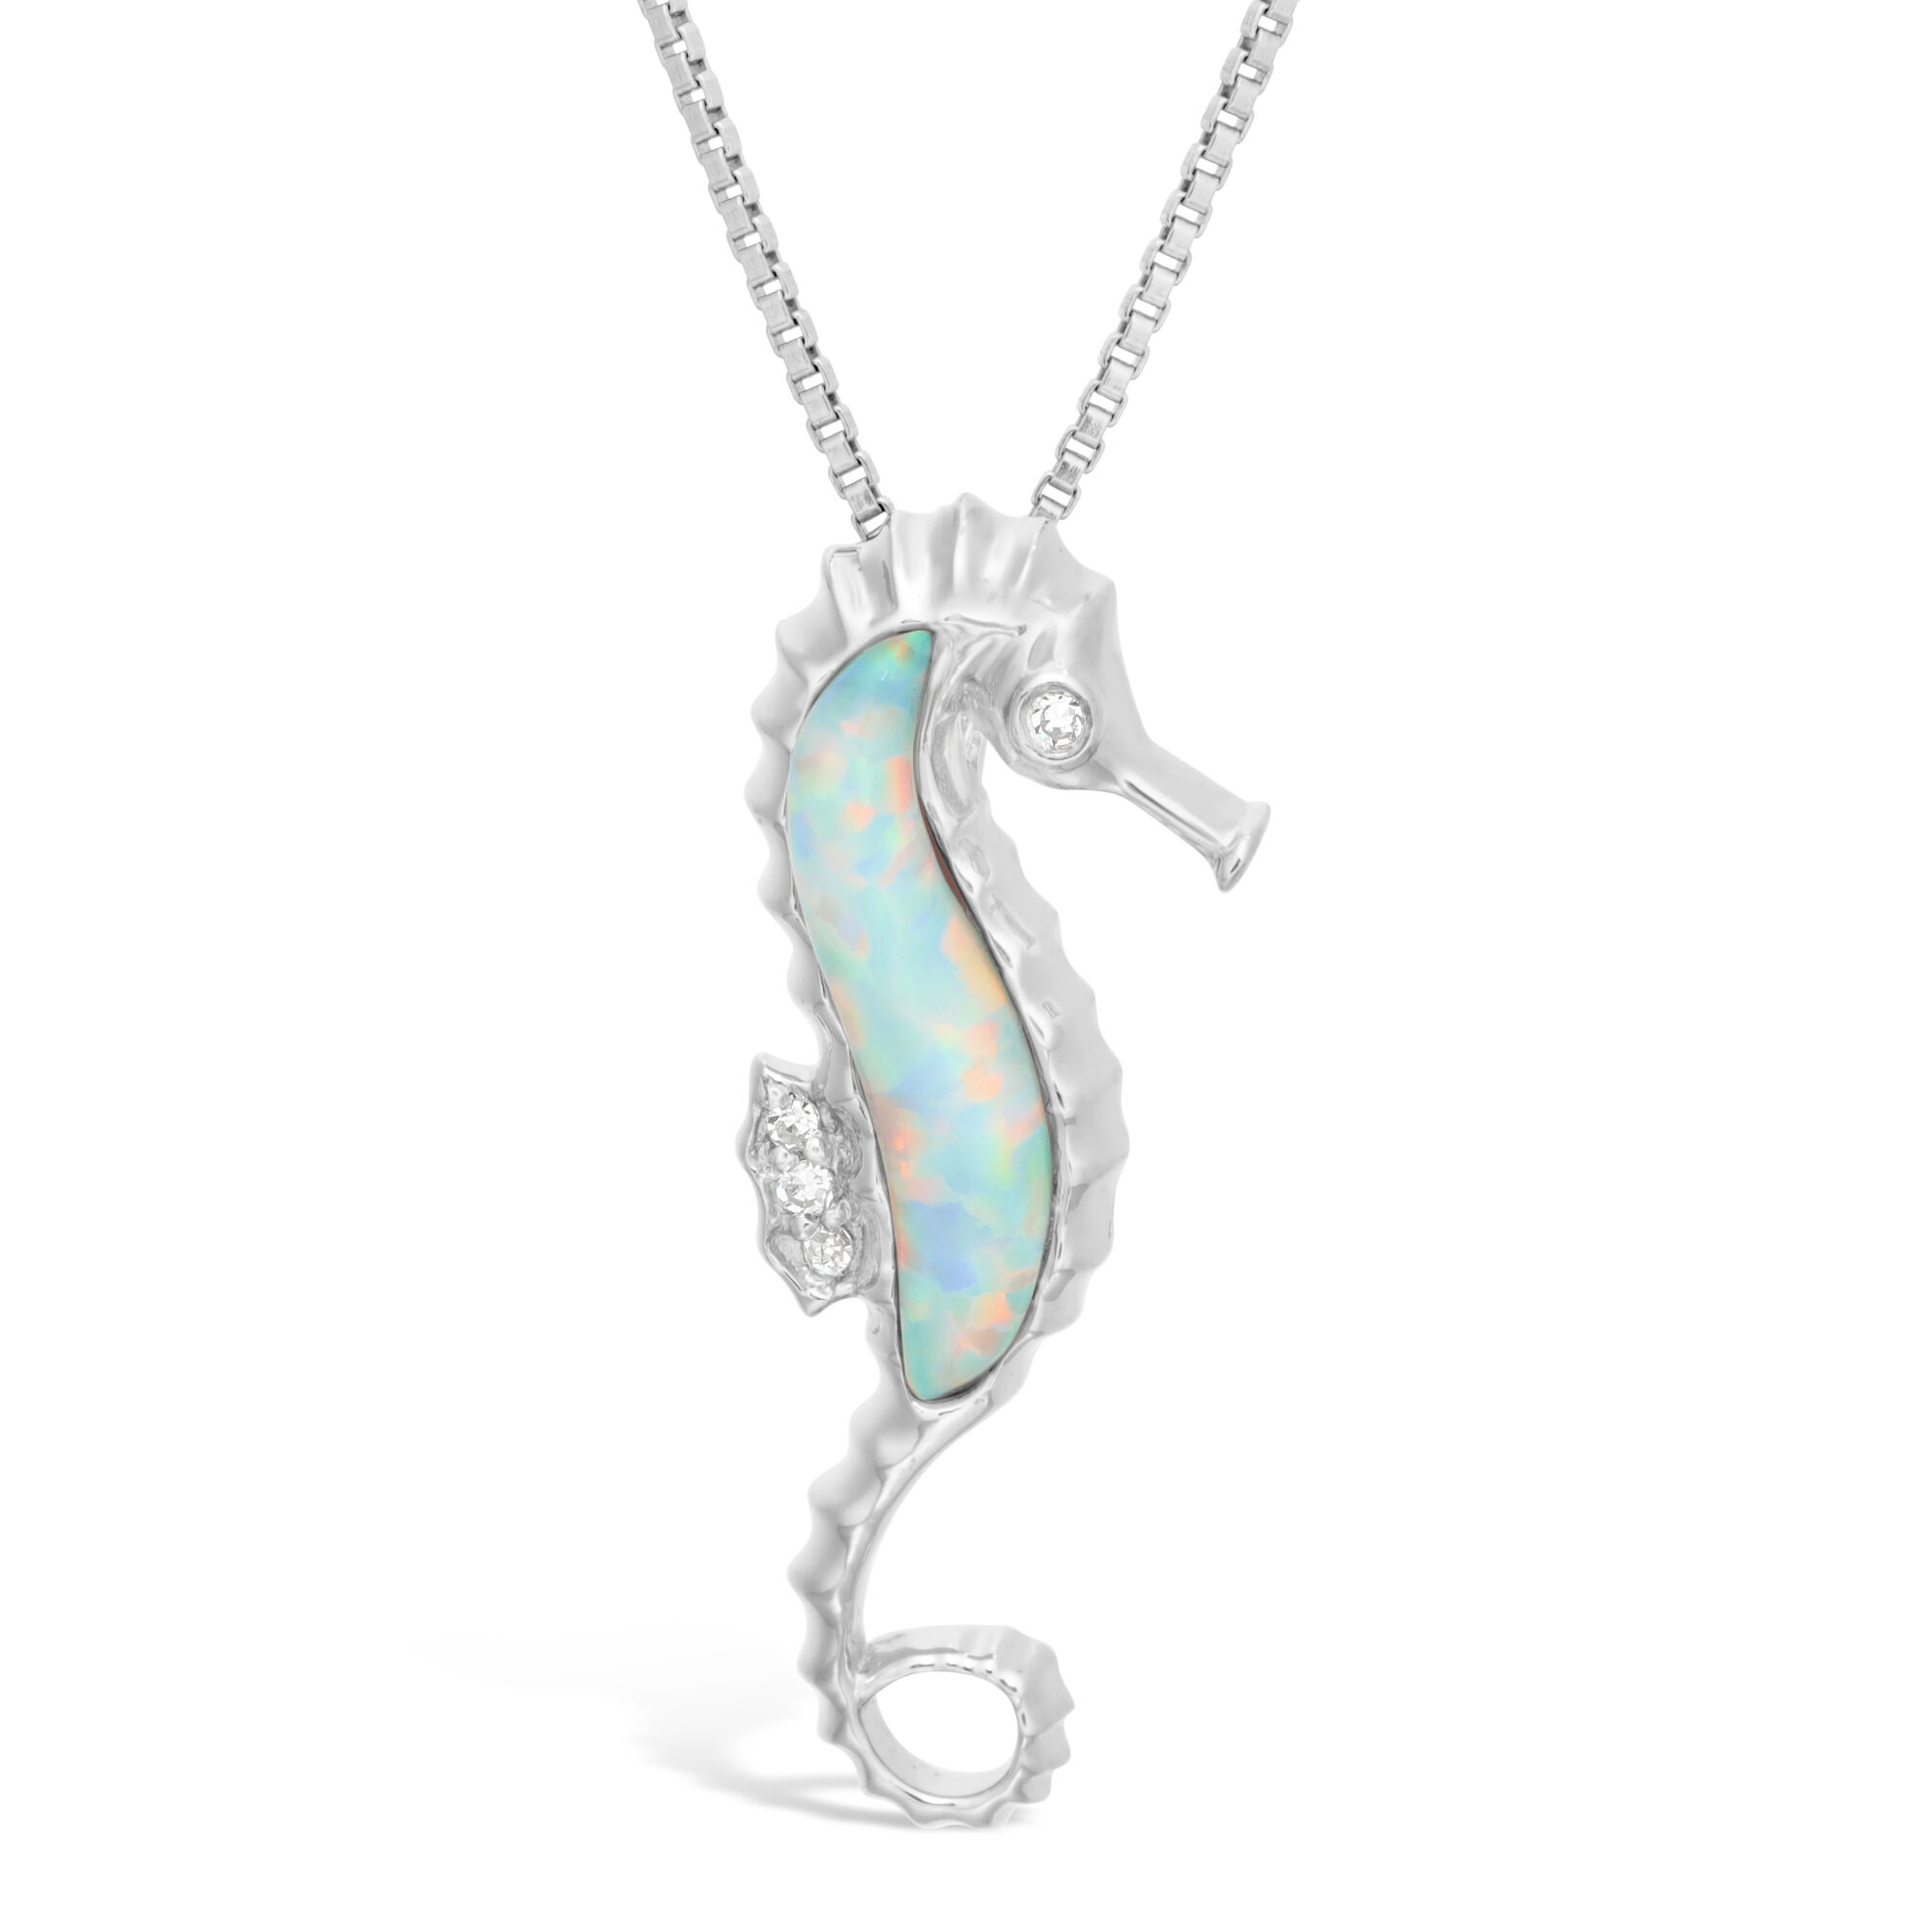 Lavari Jewelers Women's Created White Opal Seahorse Diamond Pendant with Lobster Clasp, Sterling Silver, .012 Cttw, 18 Inch Cable Chain